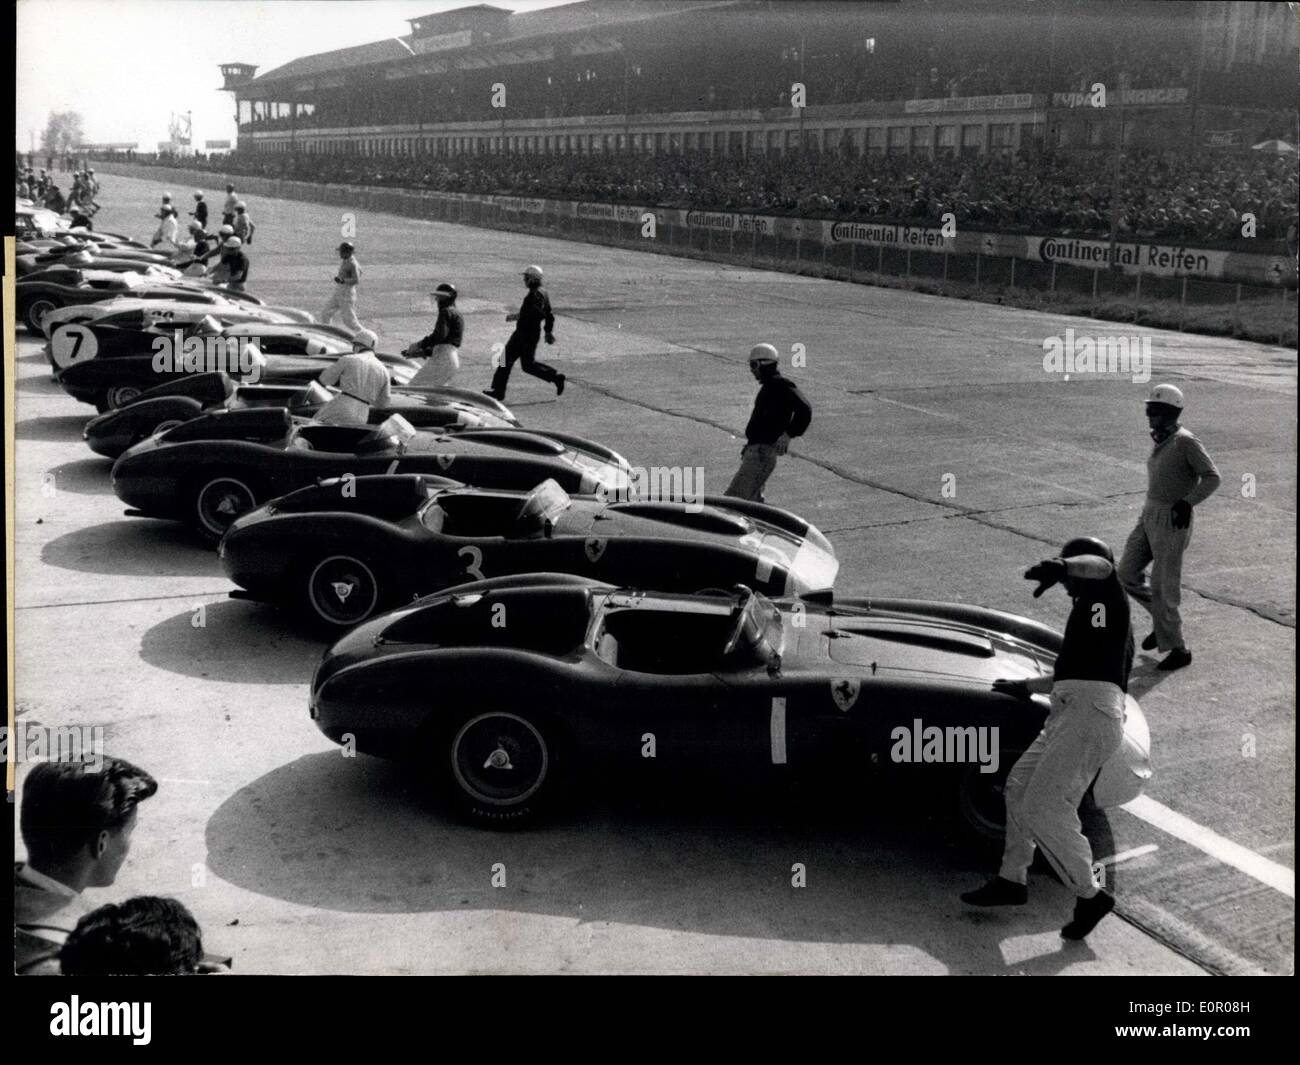 May 26, 1957 - On start for 1000km race at Nurburg-Ring/Germany the cars of the competitors are lined up. In foreground: World-Champion Fangio. Stock Photo